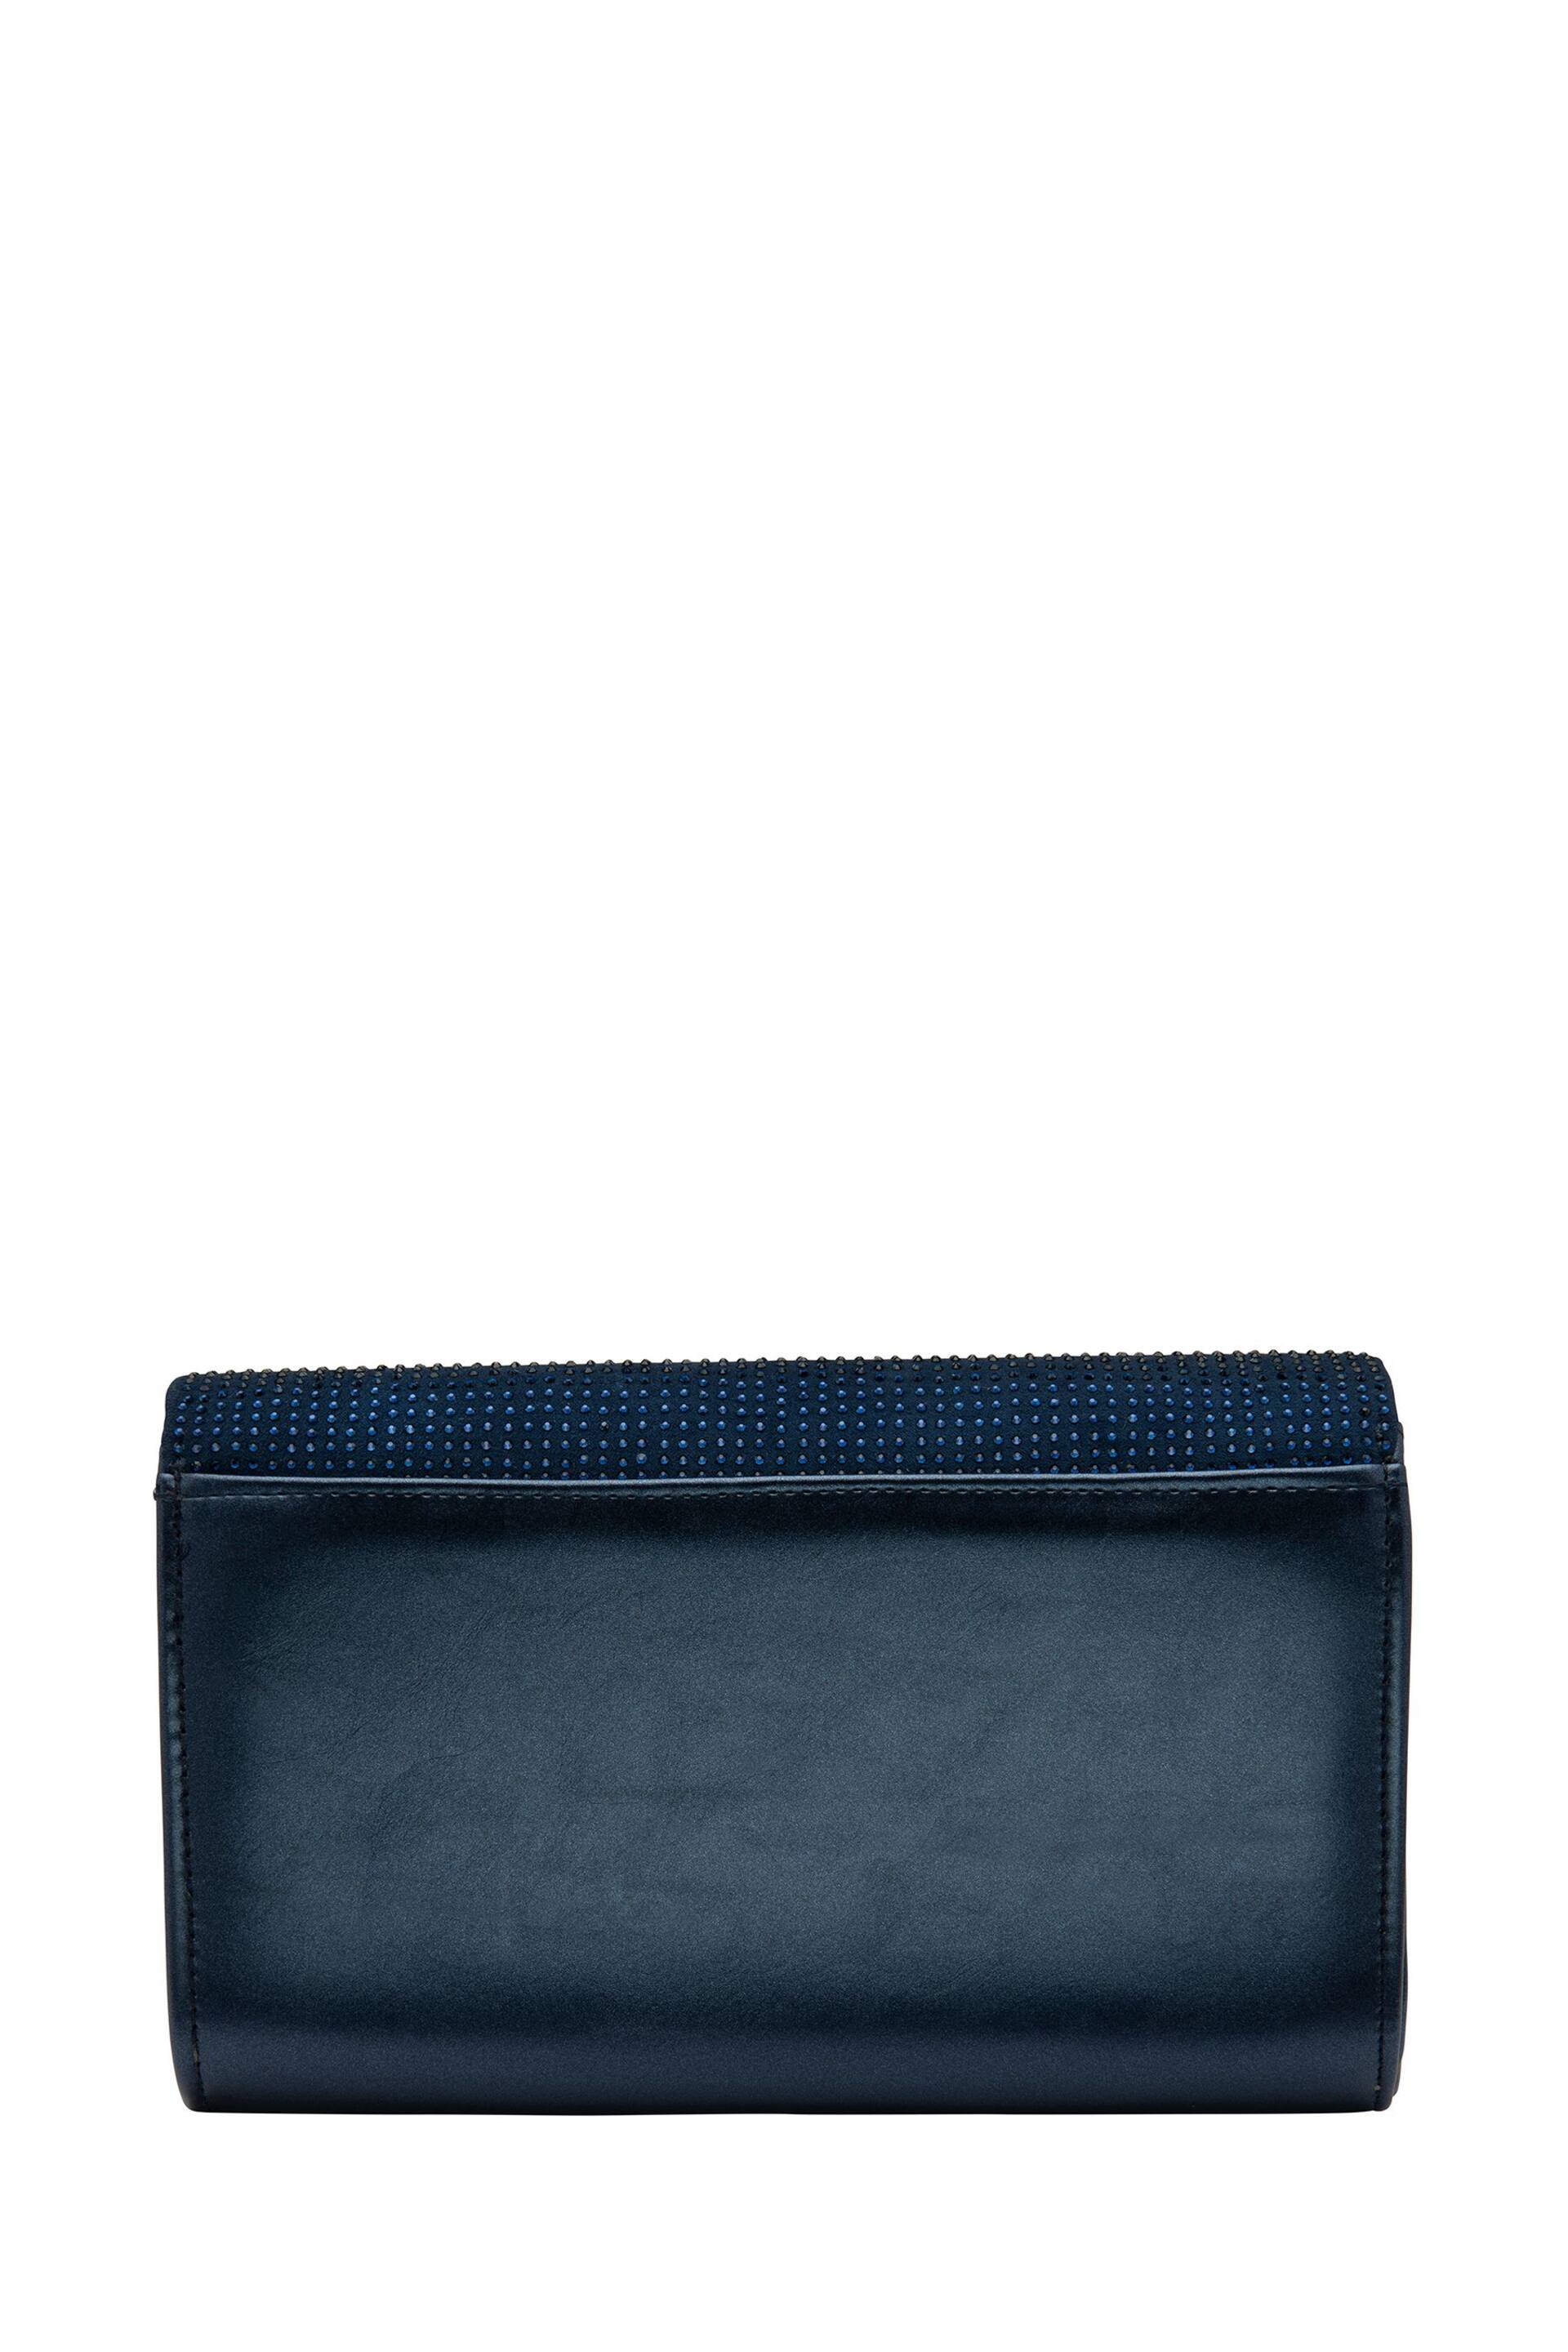 Lotus Blue Clutch Bag With Chain - Image 2 of 4